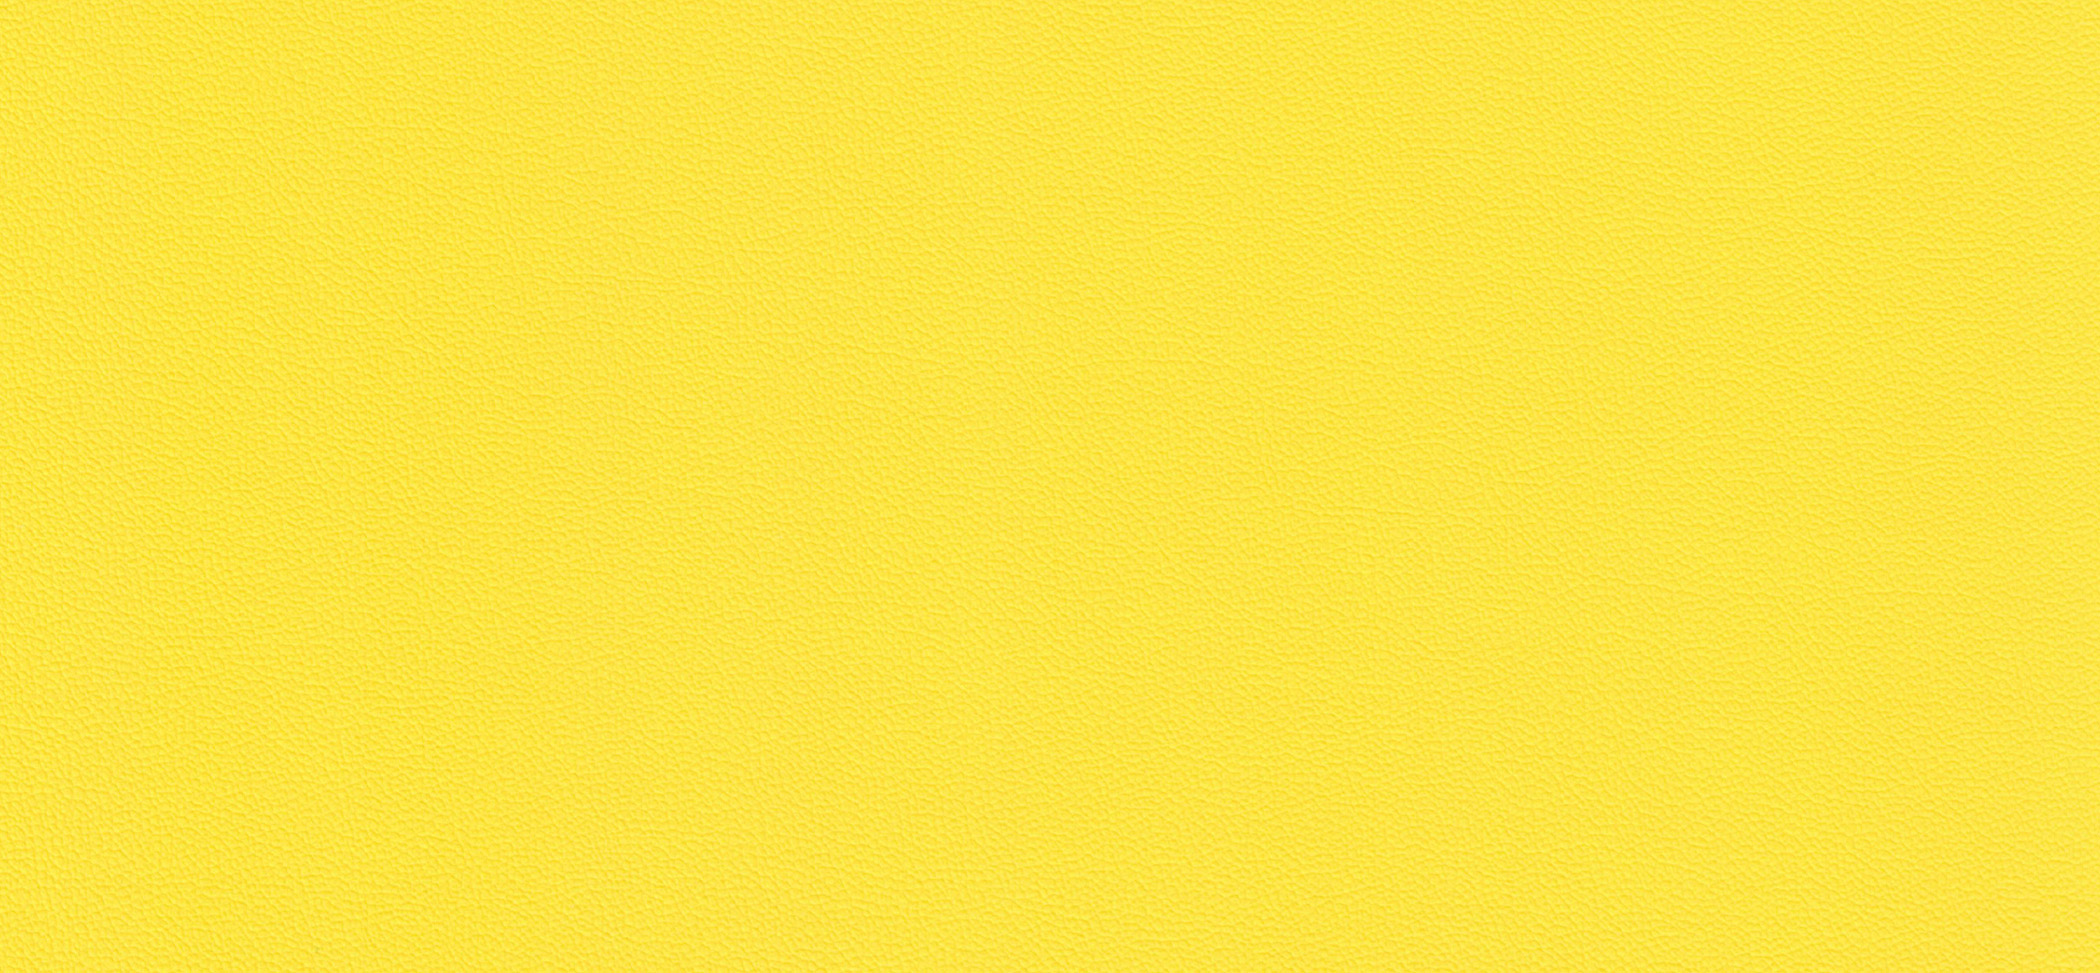 Cleanness yellow